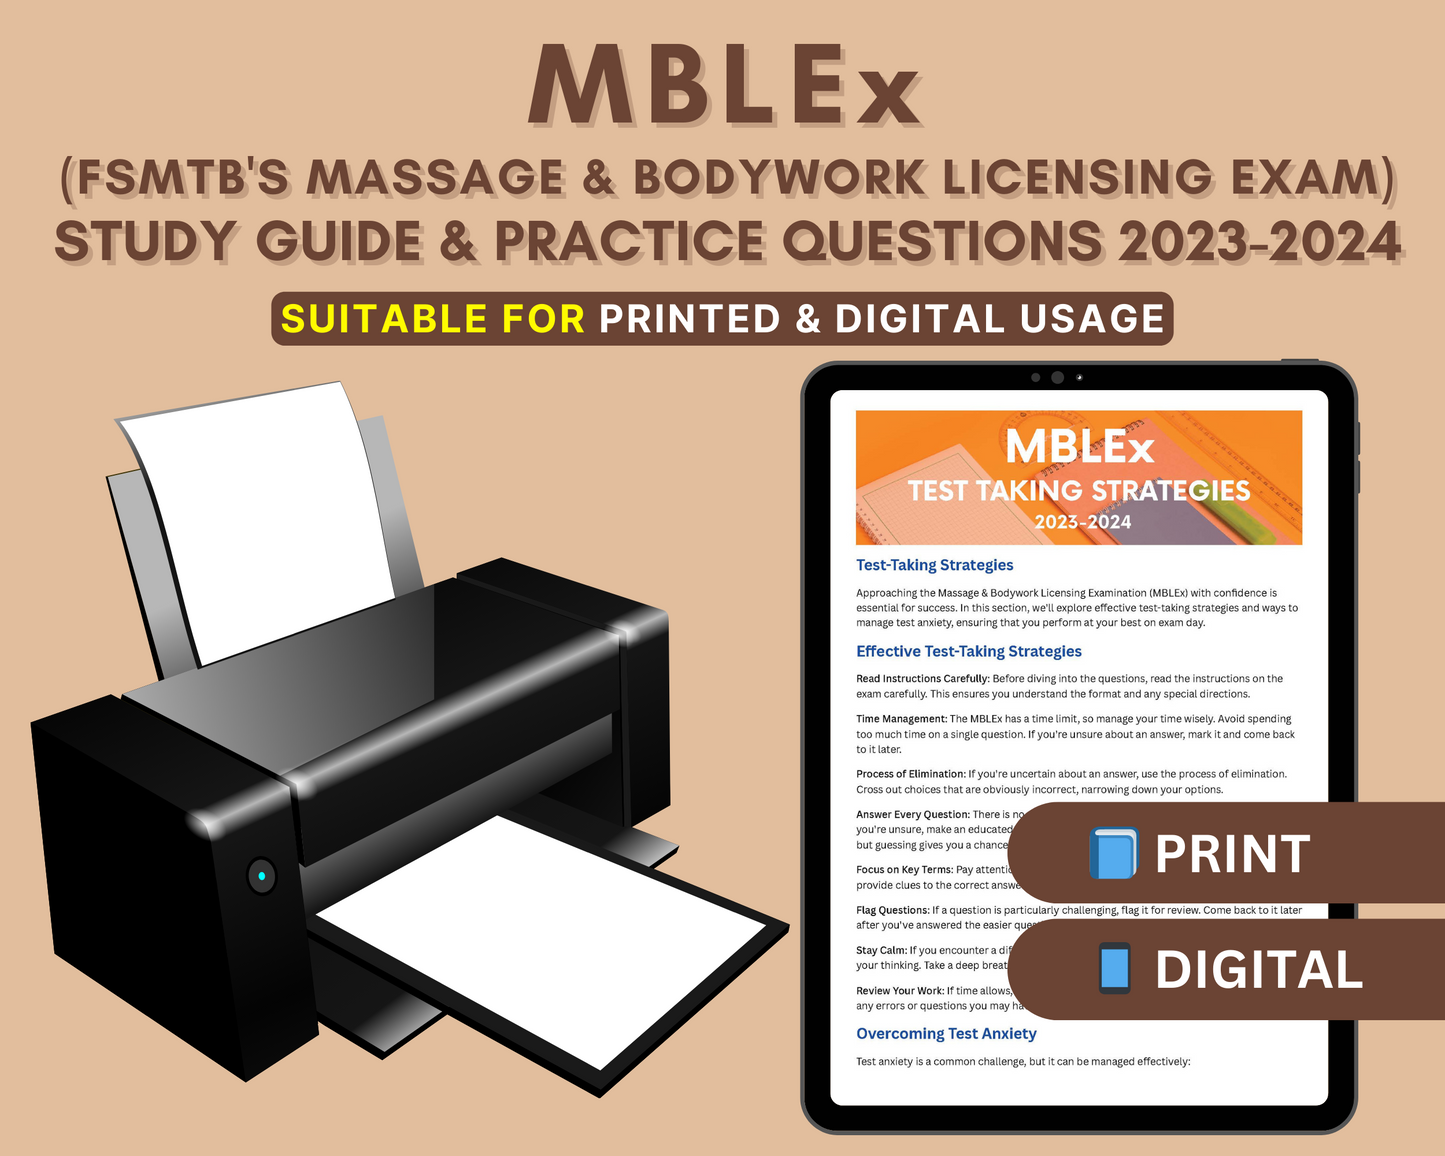 MBLEx Test Prep 2023-2024: Comprehensive Massage Therapy Exam Study Guide with In-Depth Content Review & Practice Tests